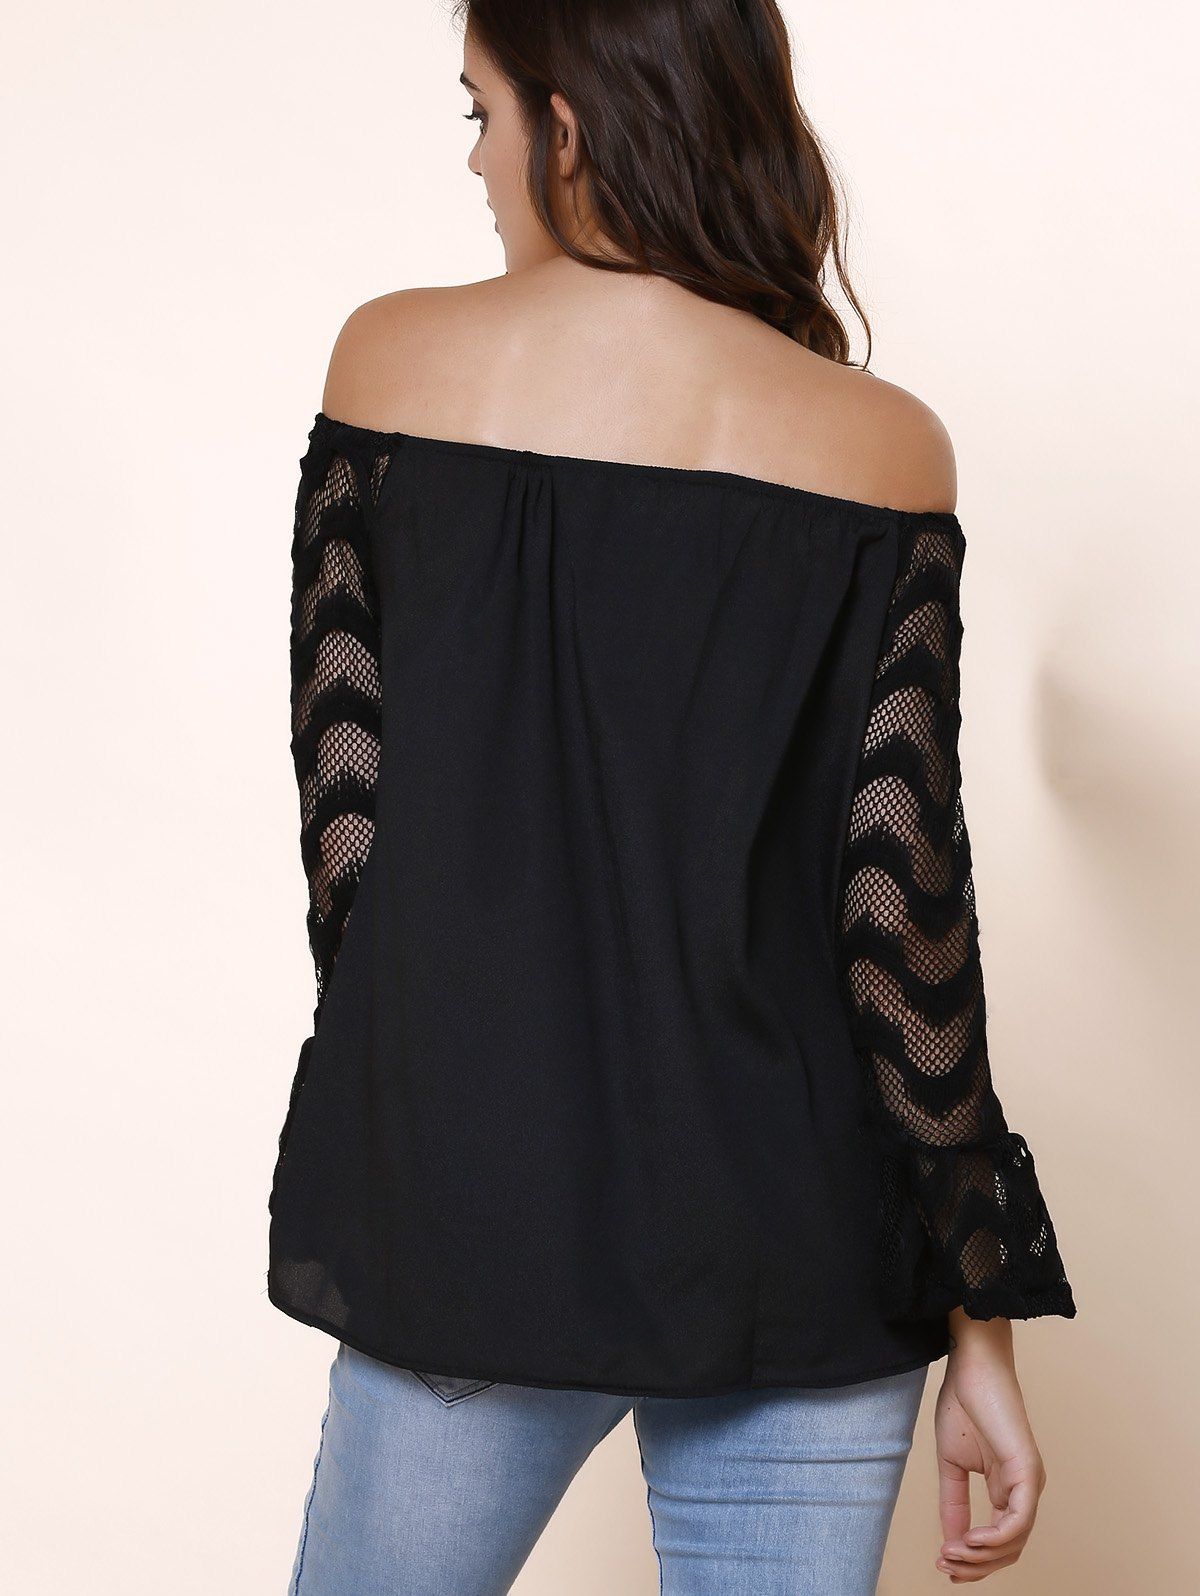 2018 Fashionable Off-The-Shoulder Lace Splicing Sleeve Black T-Shirt ...